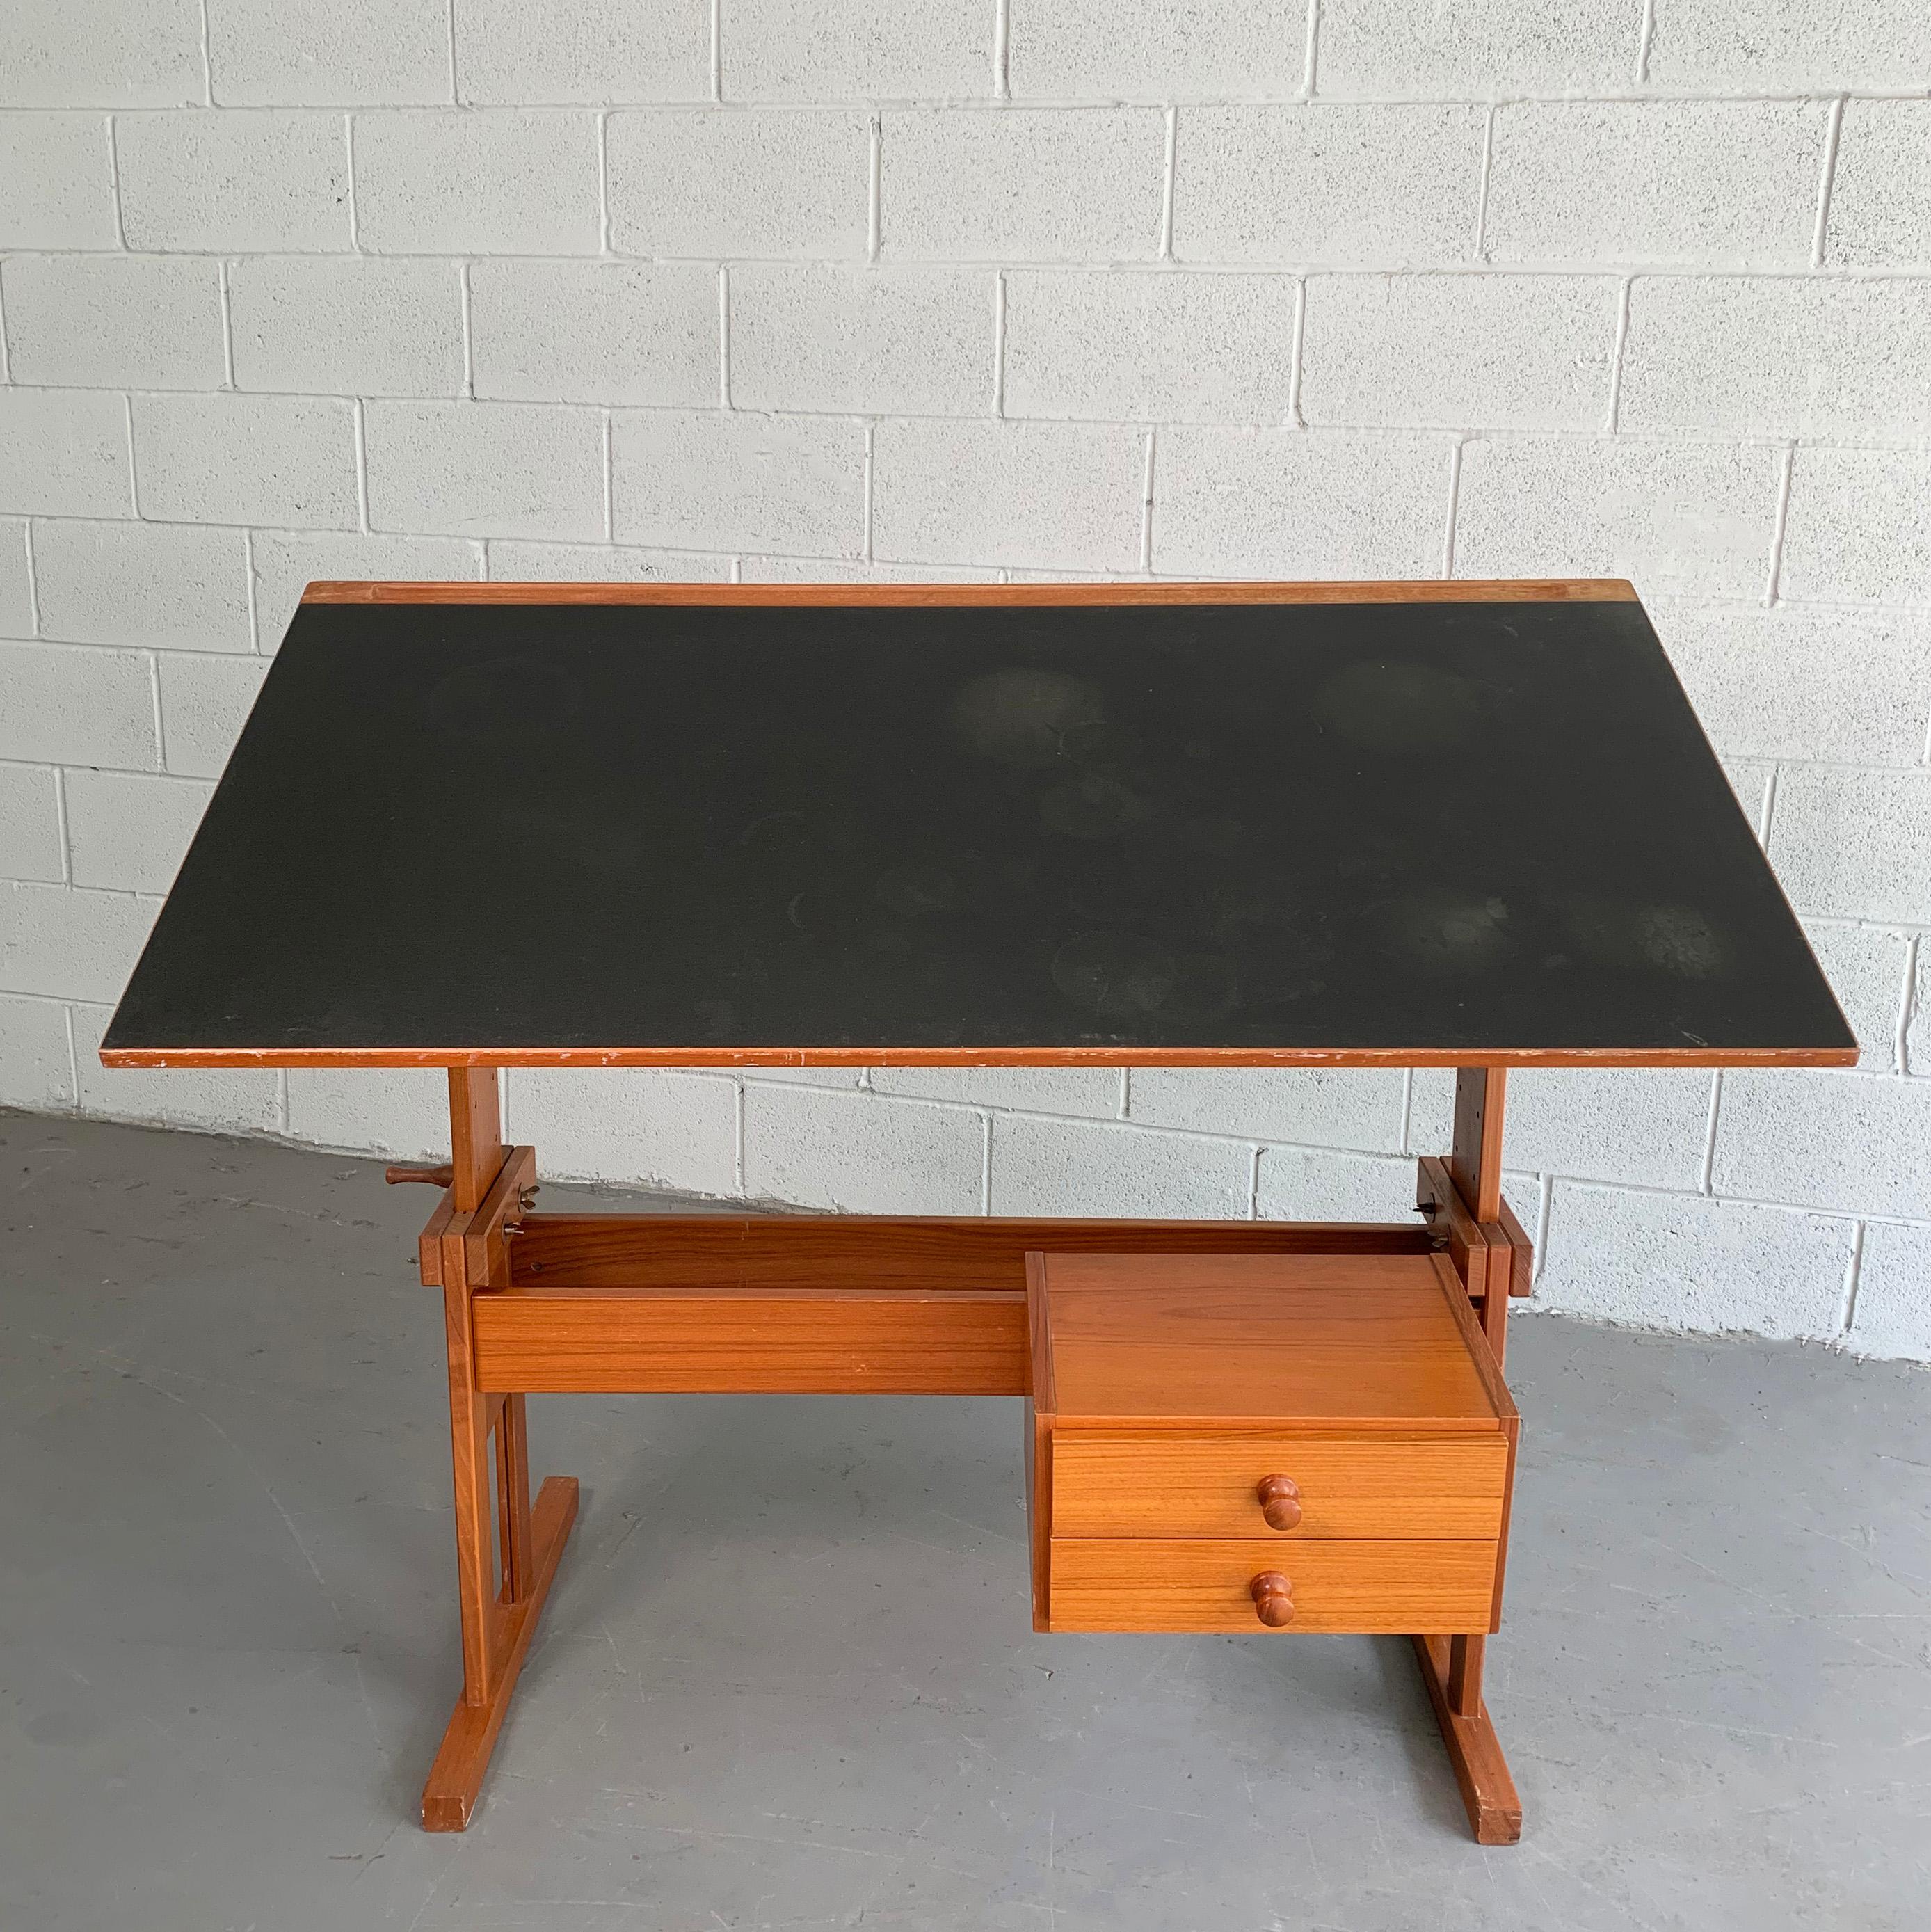 Danish modern, height and tilt adjustable, teak drafting table by Mobelfabriken Trekanten features a vinyl top and 2-drawer detachable cabinet. The top is height adjustable from 25-41 inches and tilts to 40 degrees. The drawers on the cabinet are 15